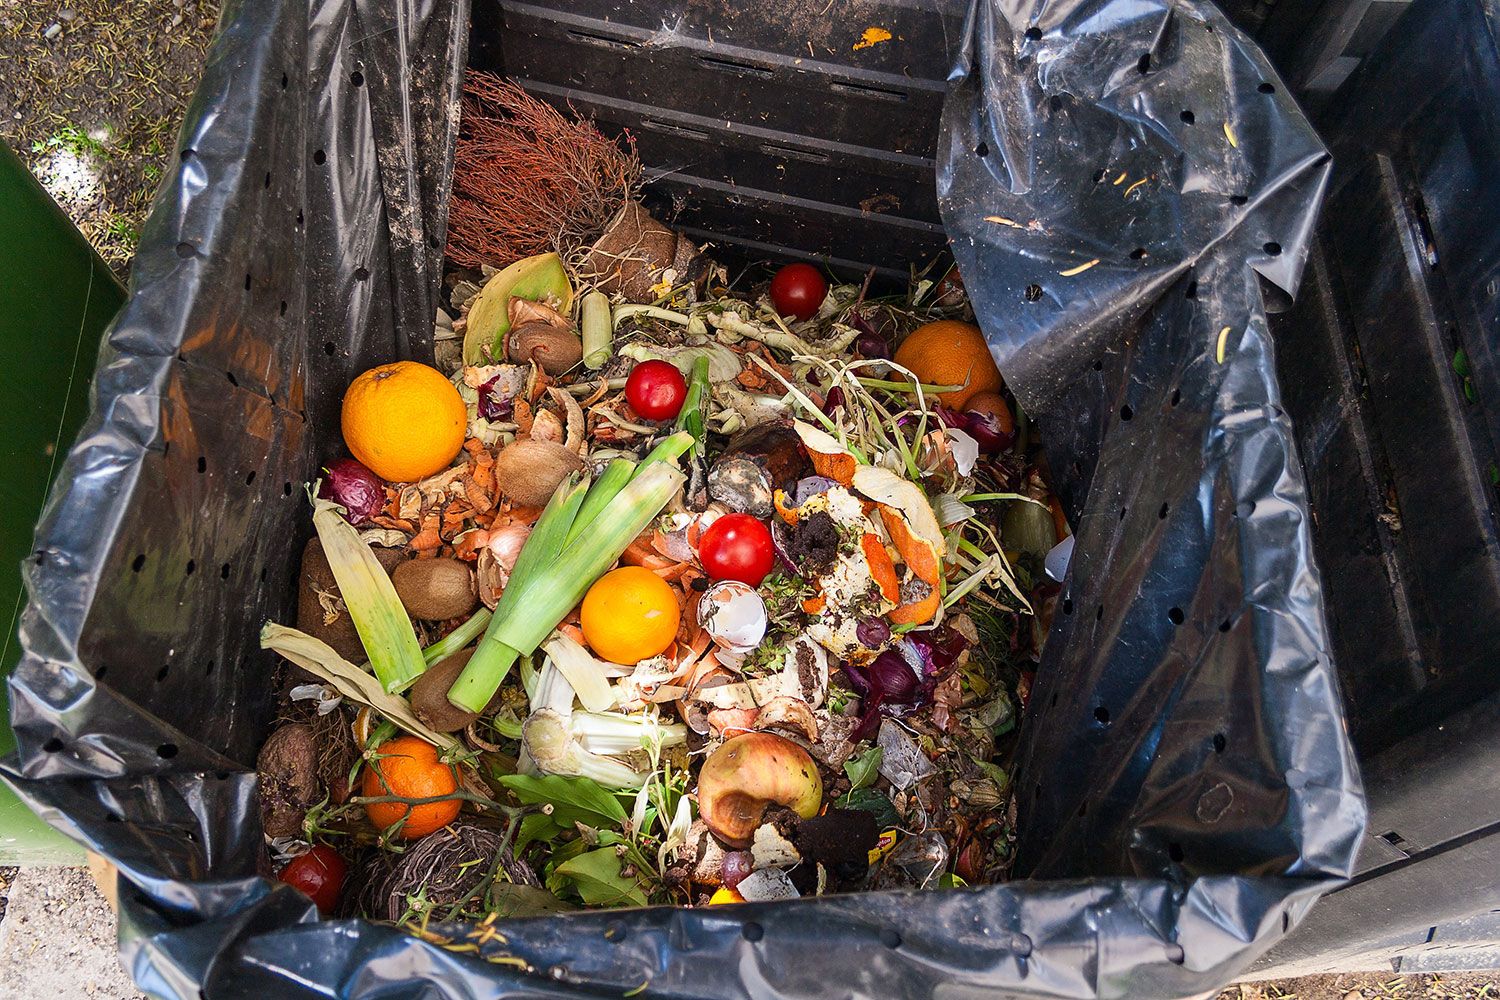 fruit and vegetable scraps in a waste bin